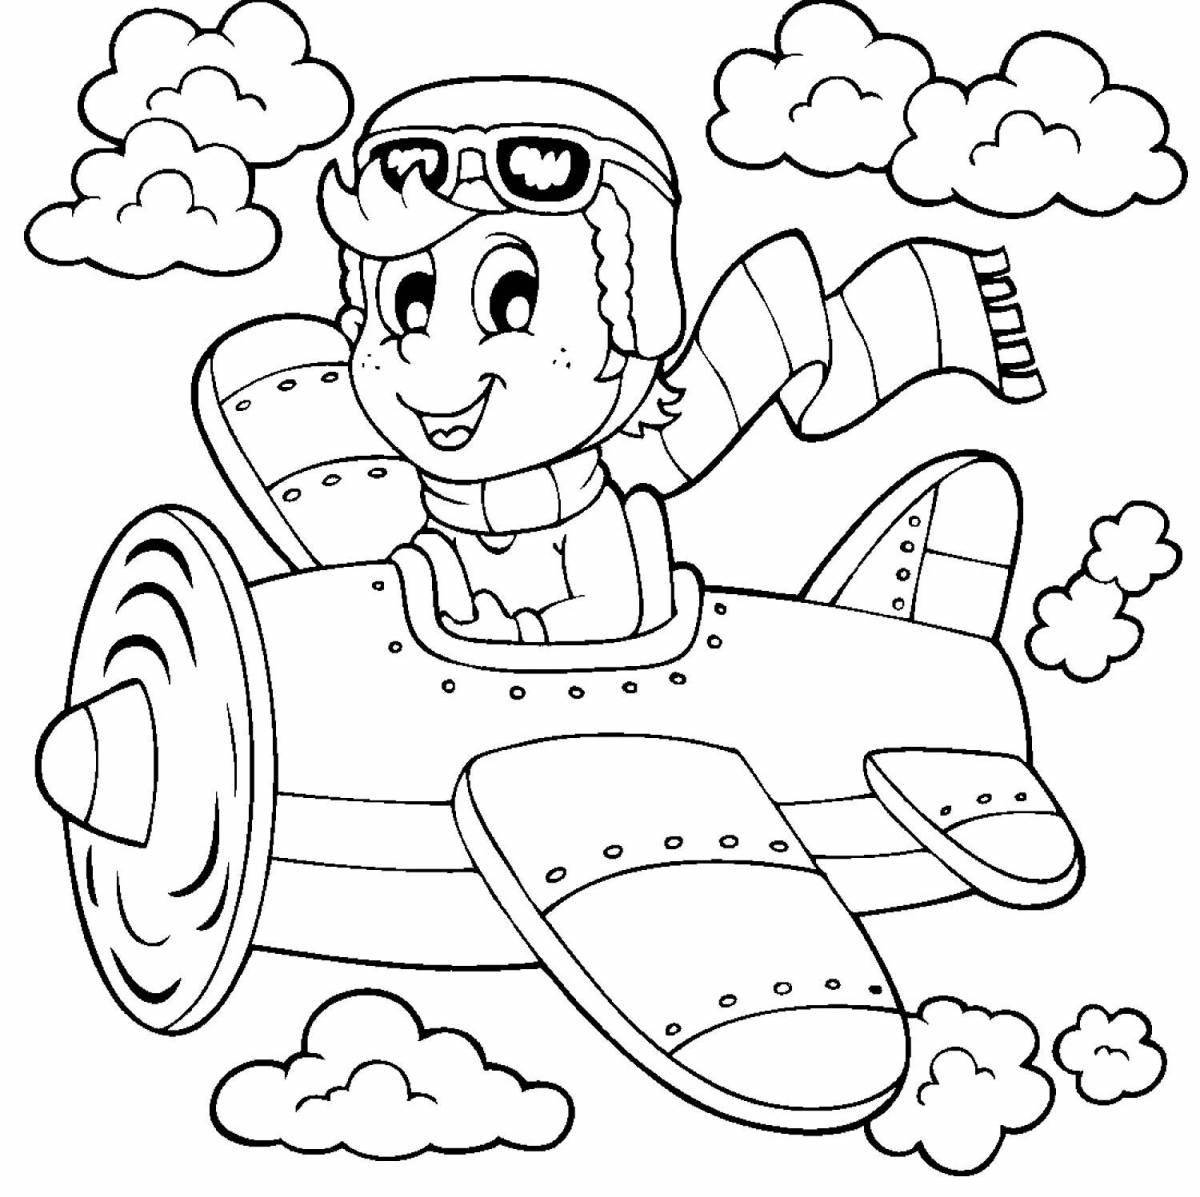 Playful military coloring for toddlers